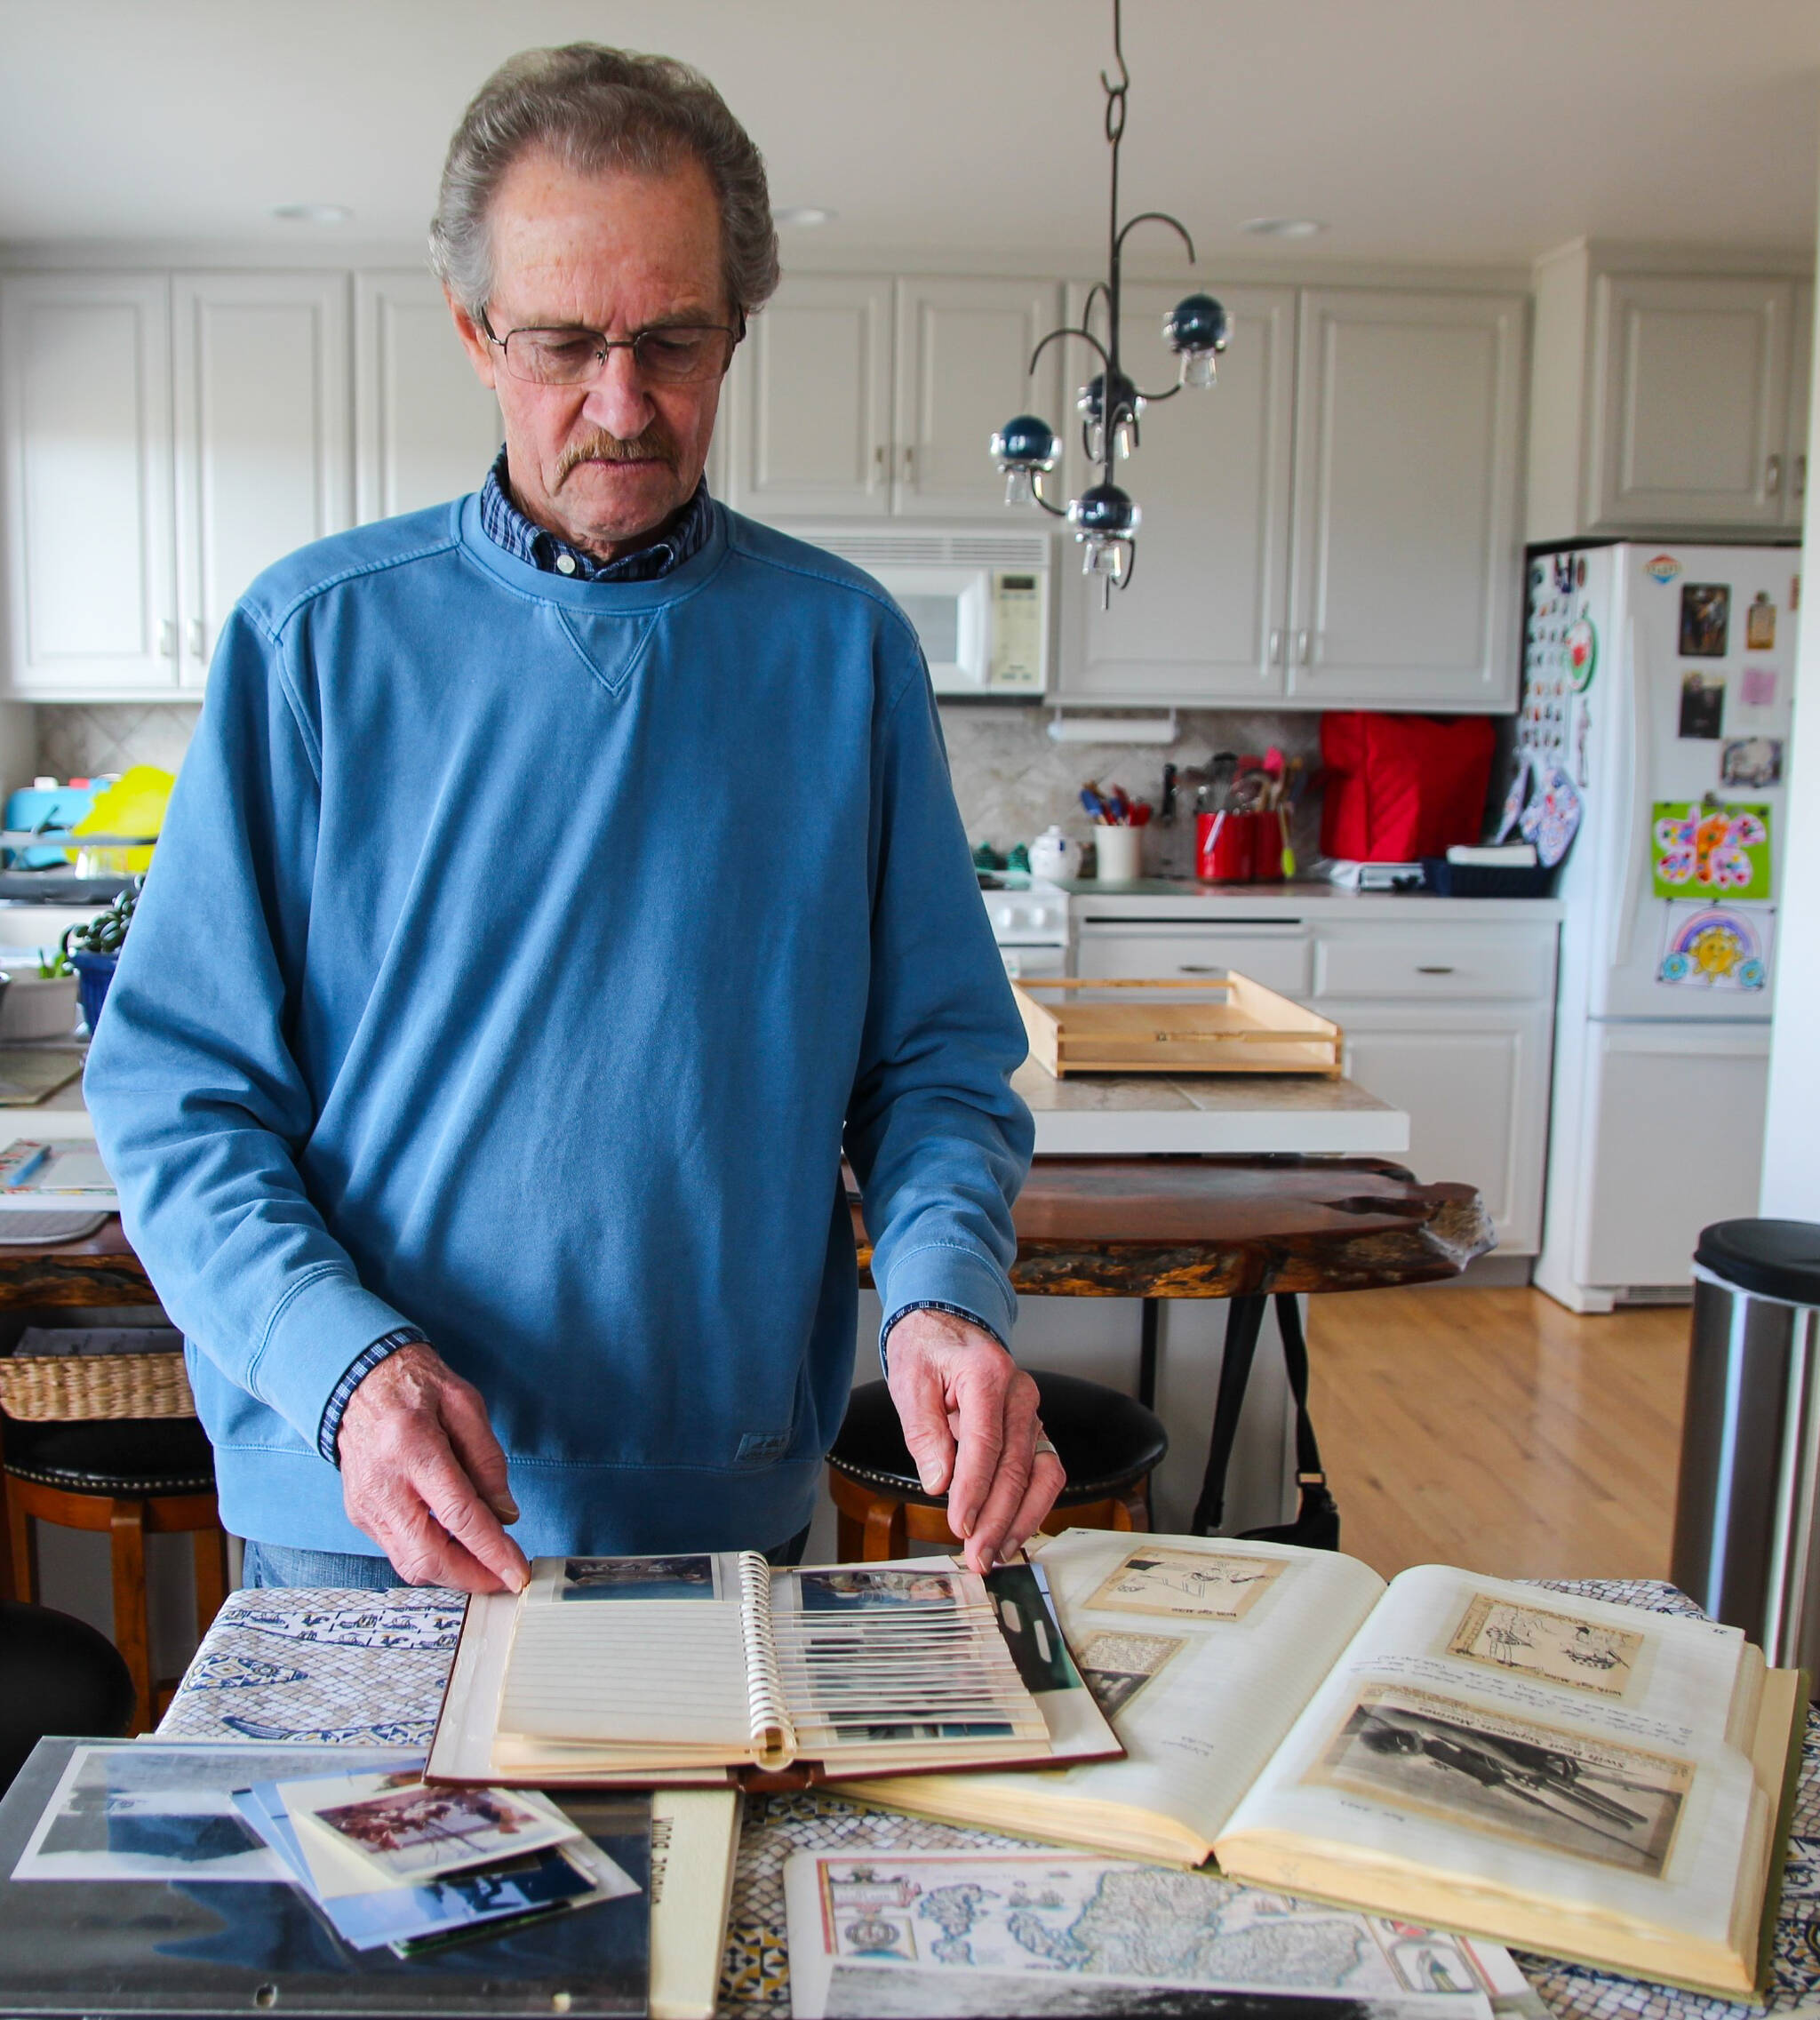 Donald Kaiser, a veteran, looks through photos from the Vietnam War. To this day, he keeps an extensive collection of photos, newspaper cut-outs and diary entries he collected and wrote while he was in charge of a crew of five men on board a swiftboat. (Photo by Luisa Loi)